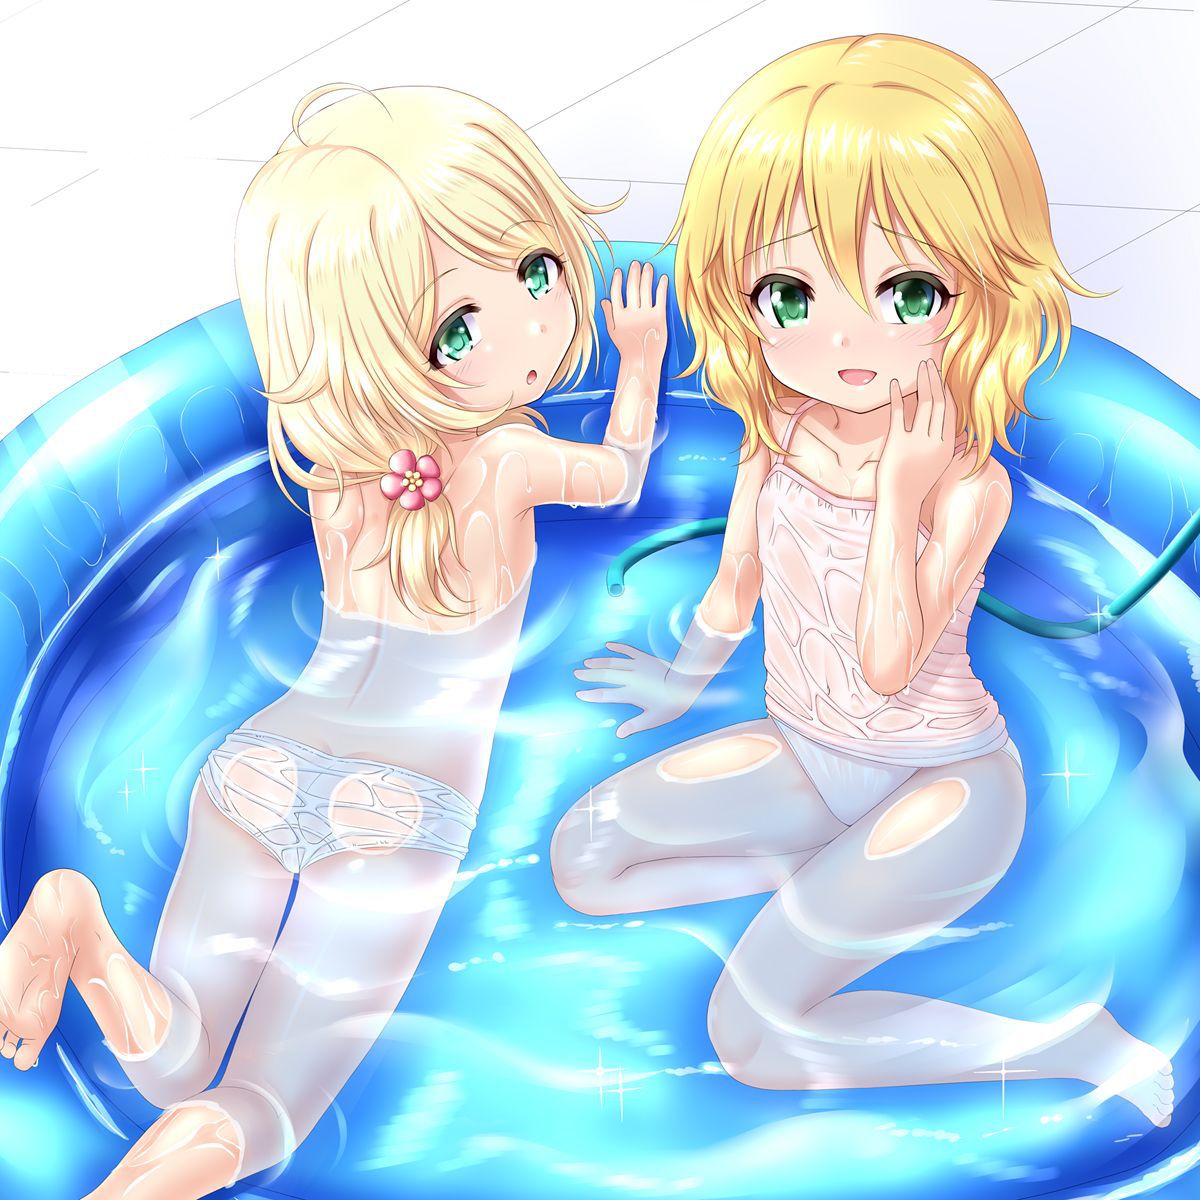 [Secondary/ZIP] wet transparent beautiful girl image that I see underwear or skin wet clothes 20